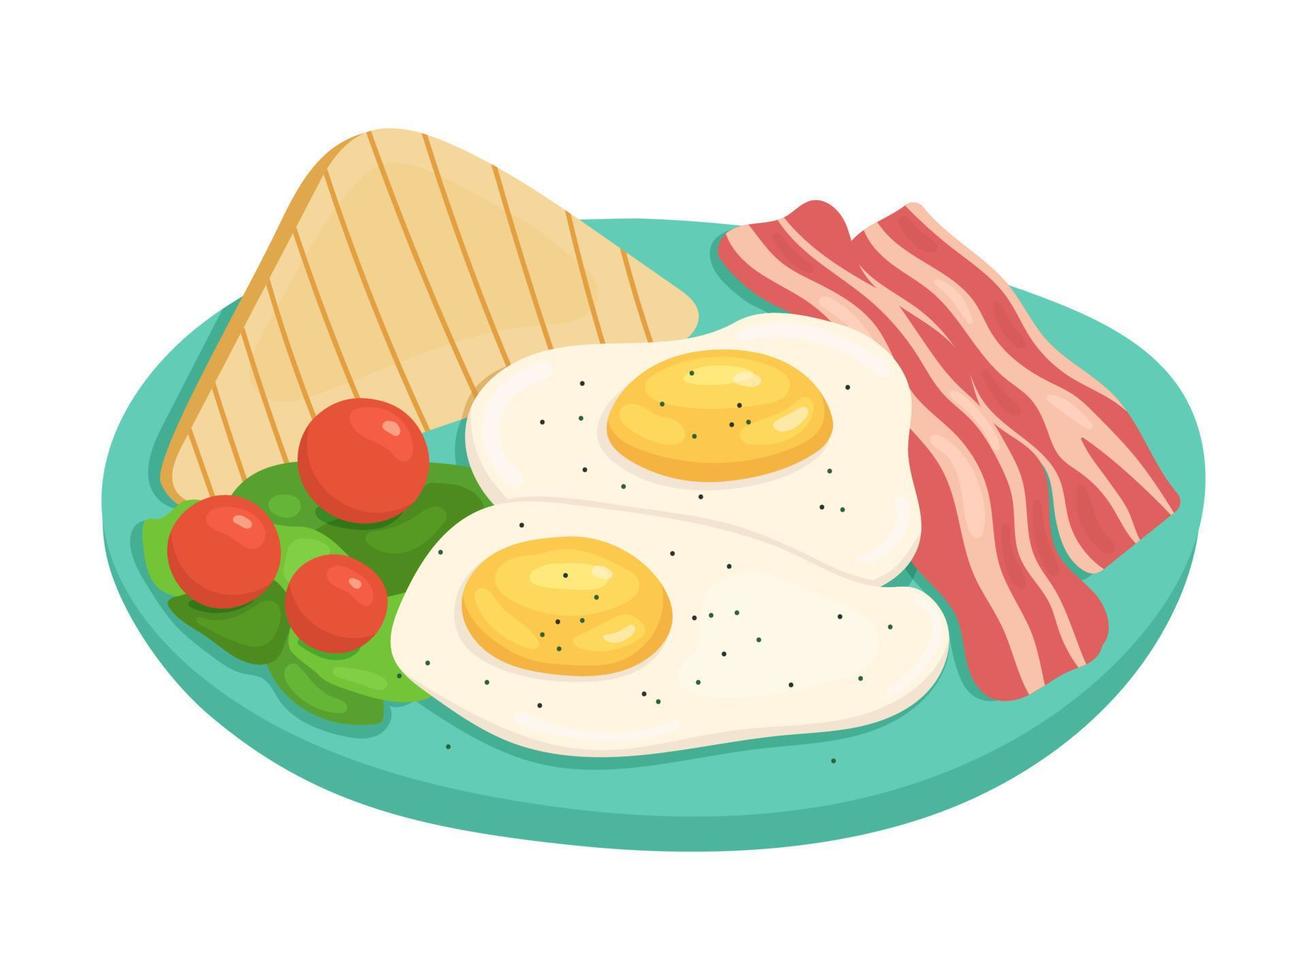 English traditional breakfast of scrambled eggs, bacon and toast with vegetables. Vector illustration of food.